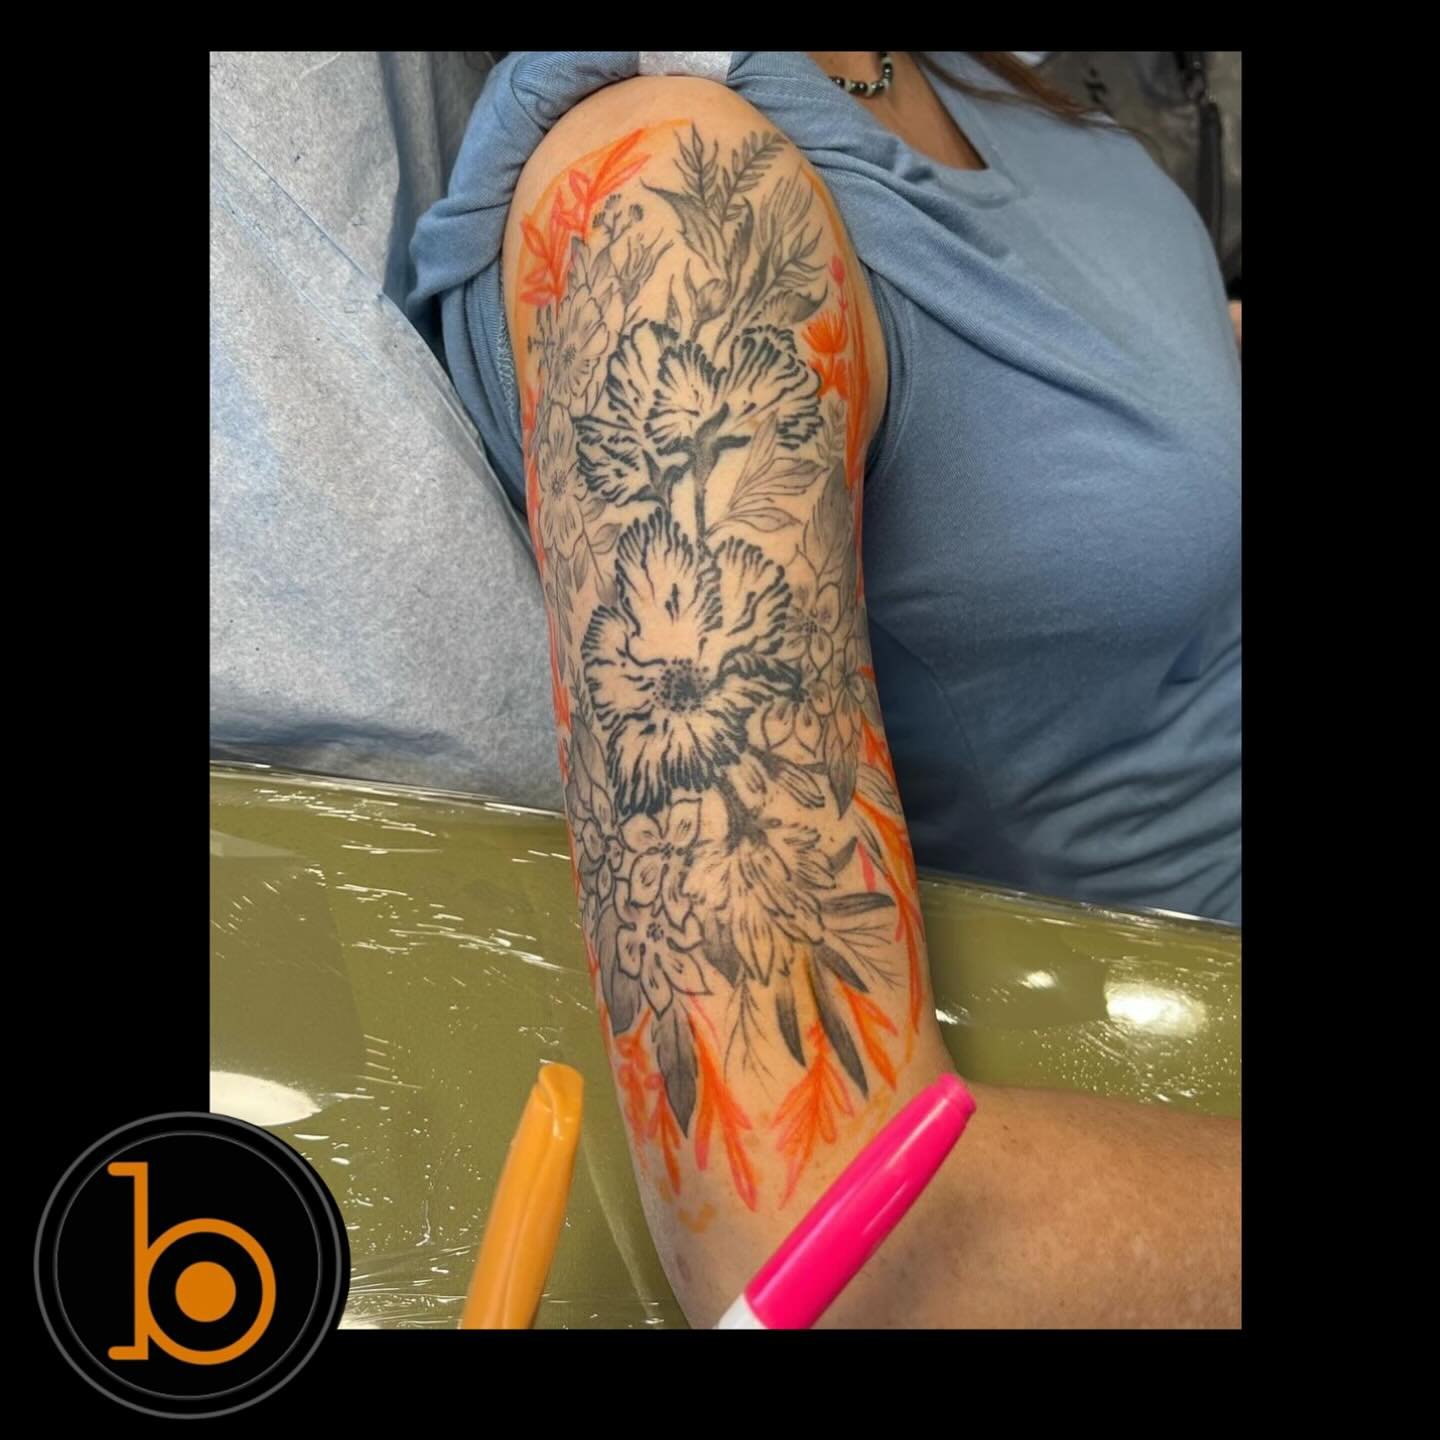 Some additions to this floral piece by resident artist @tbrewertattoo 💐🌱
➖➖➖➖➖➖➖➖➖➖➖➖➖➖➖➖➖
Blueprint Gallery
138 Russell St
 Hadley MA 01035
📱(413)-387-0221 
WALK-INS WELCOME 
🕸️ www.blueprintgallery.com 🕸️
⬇️⬇️⬇️⬇️⬇️⬇️⬇️⬇️⬇️⬇️⬇️⬇️⬇️
Made using 